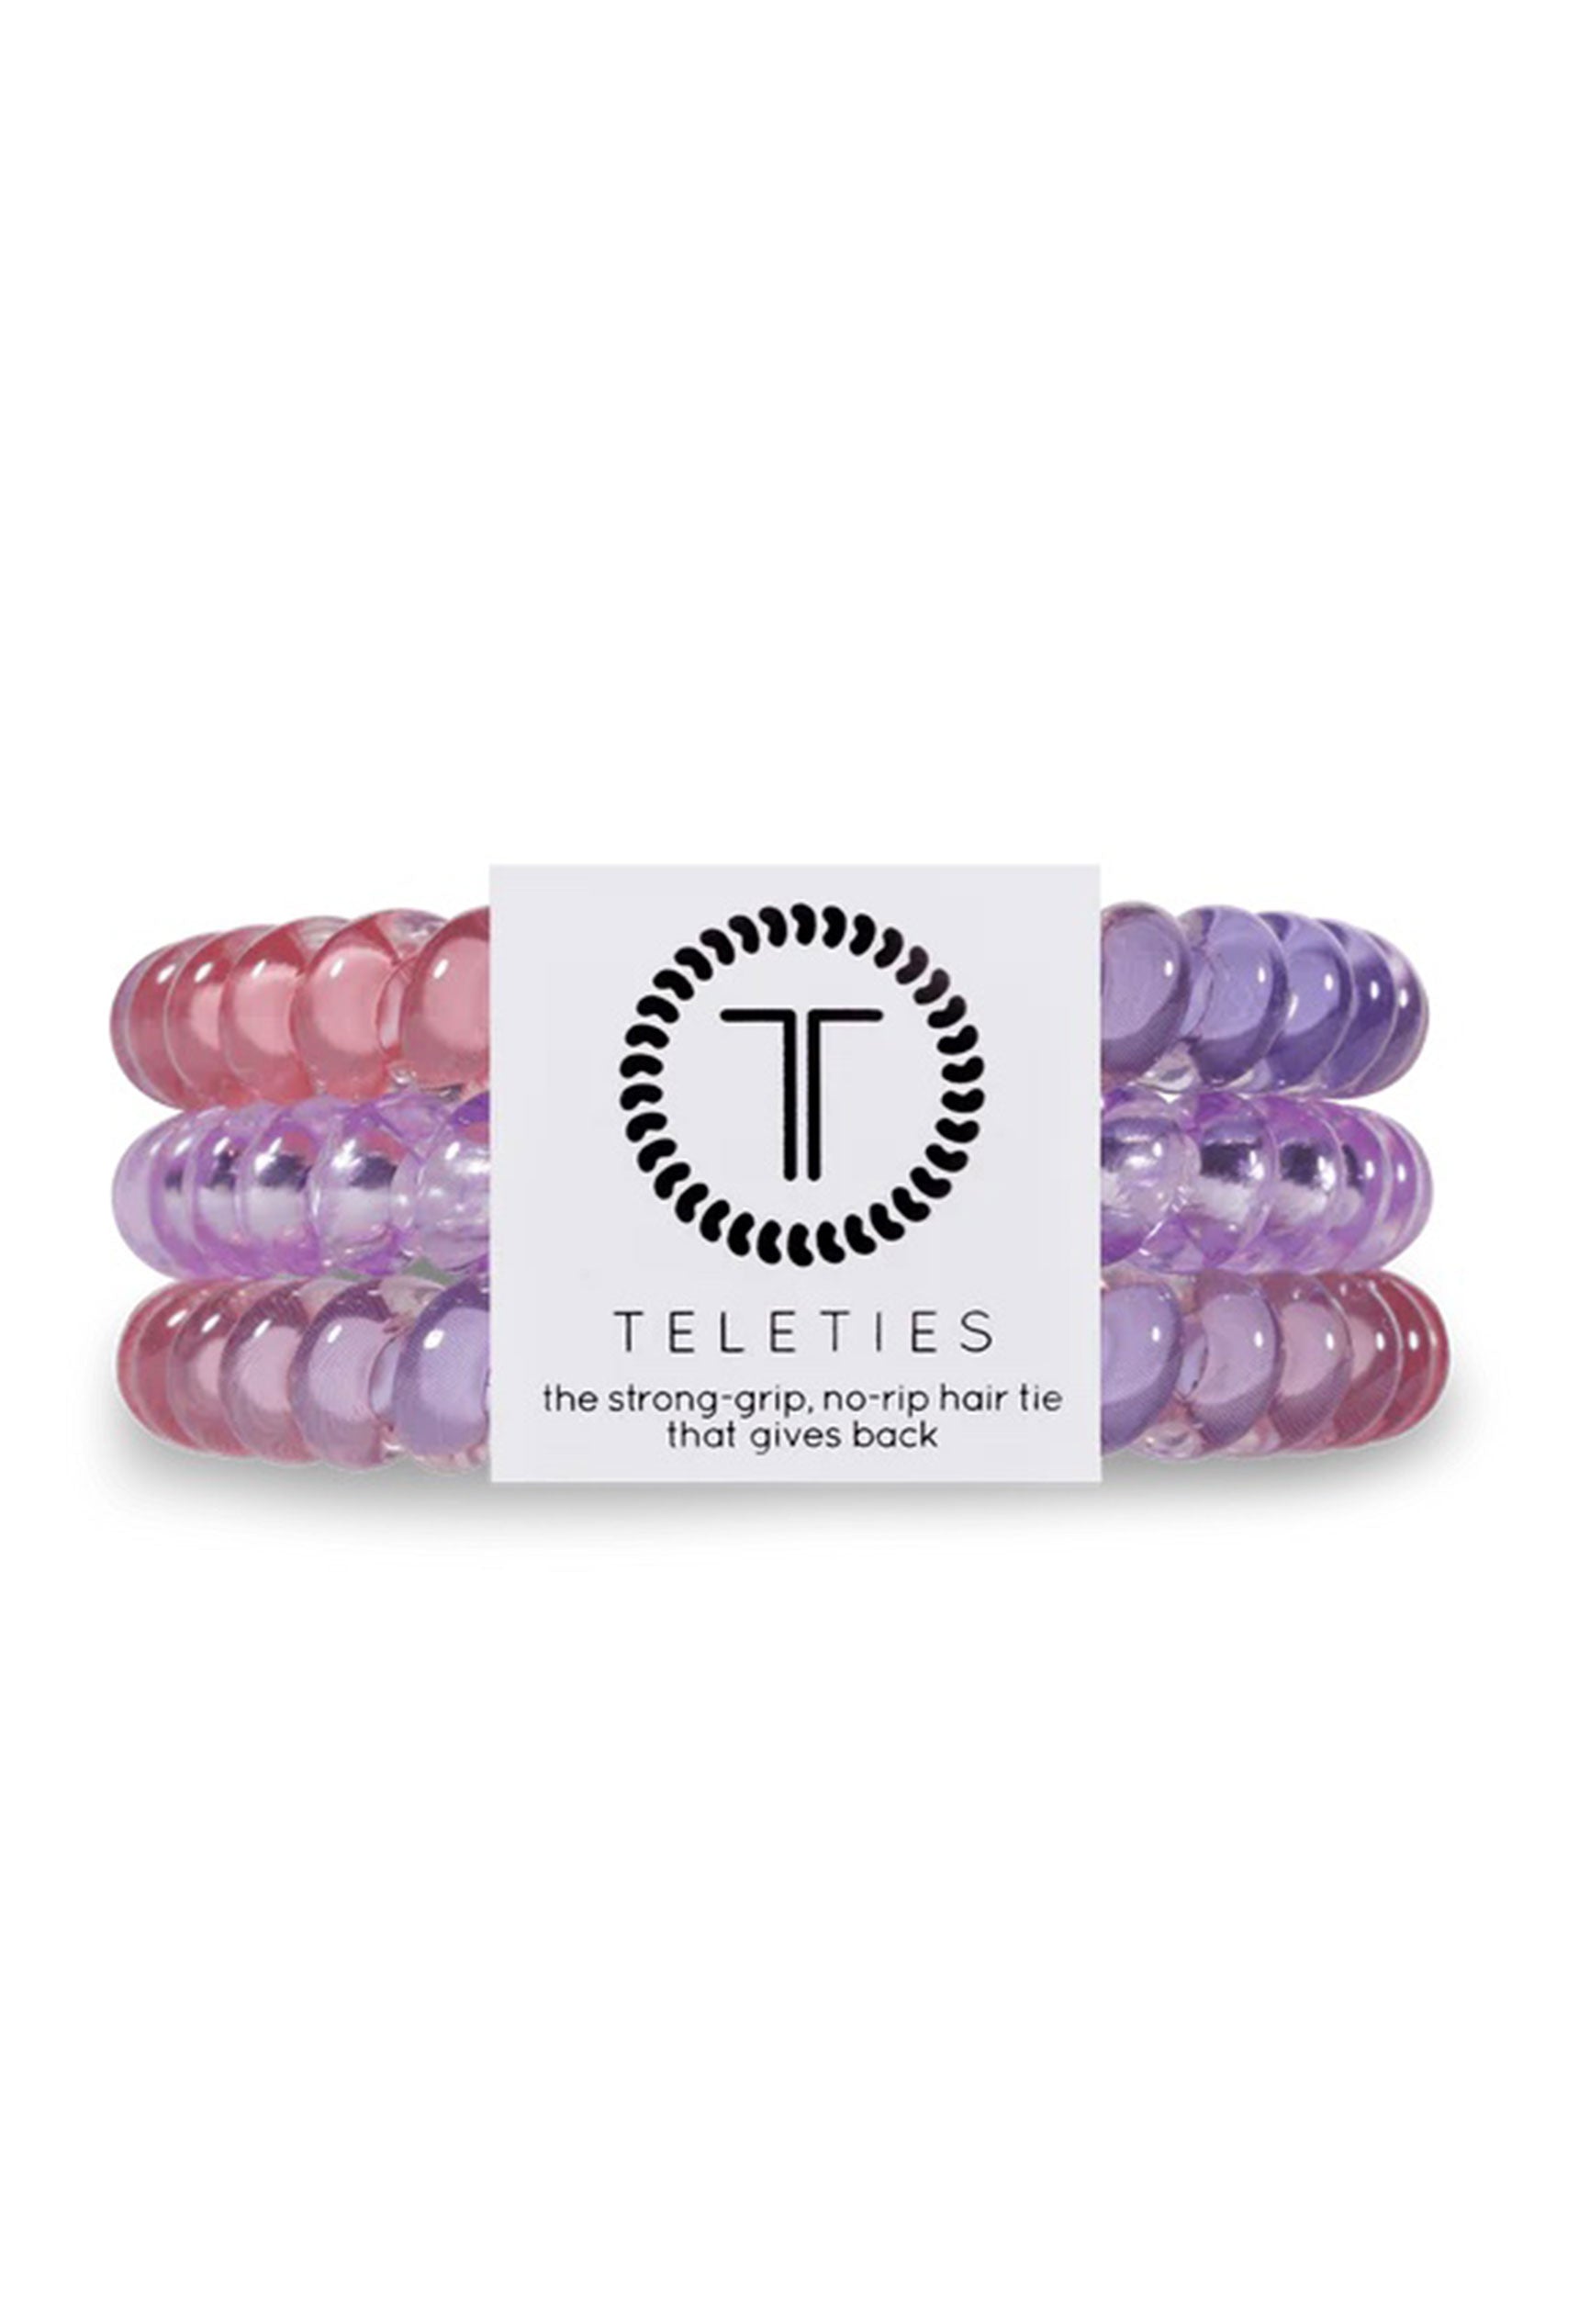 TELETIES Small Hair Ties - Cotton Candy Sky, set of three hair coils, purple and pink